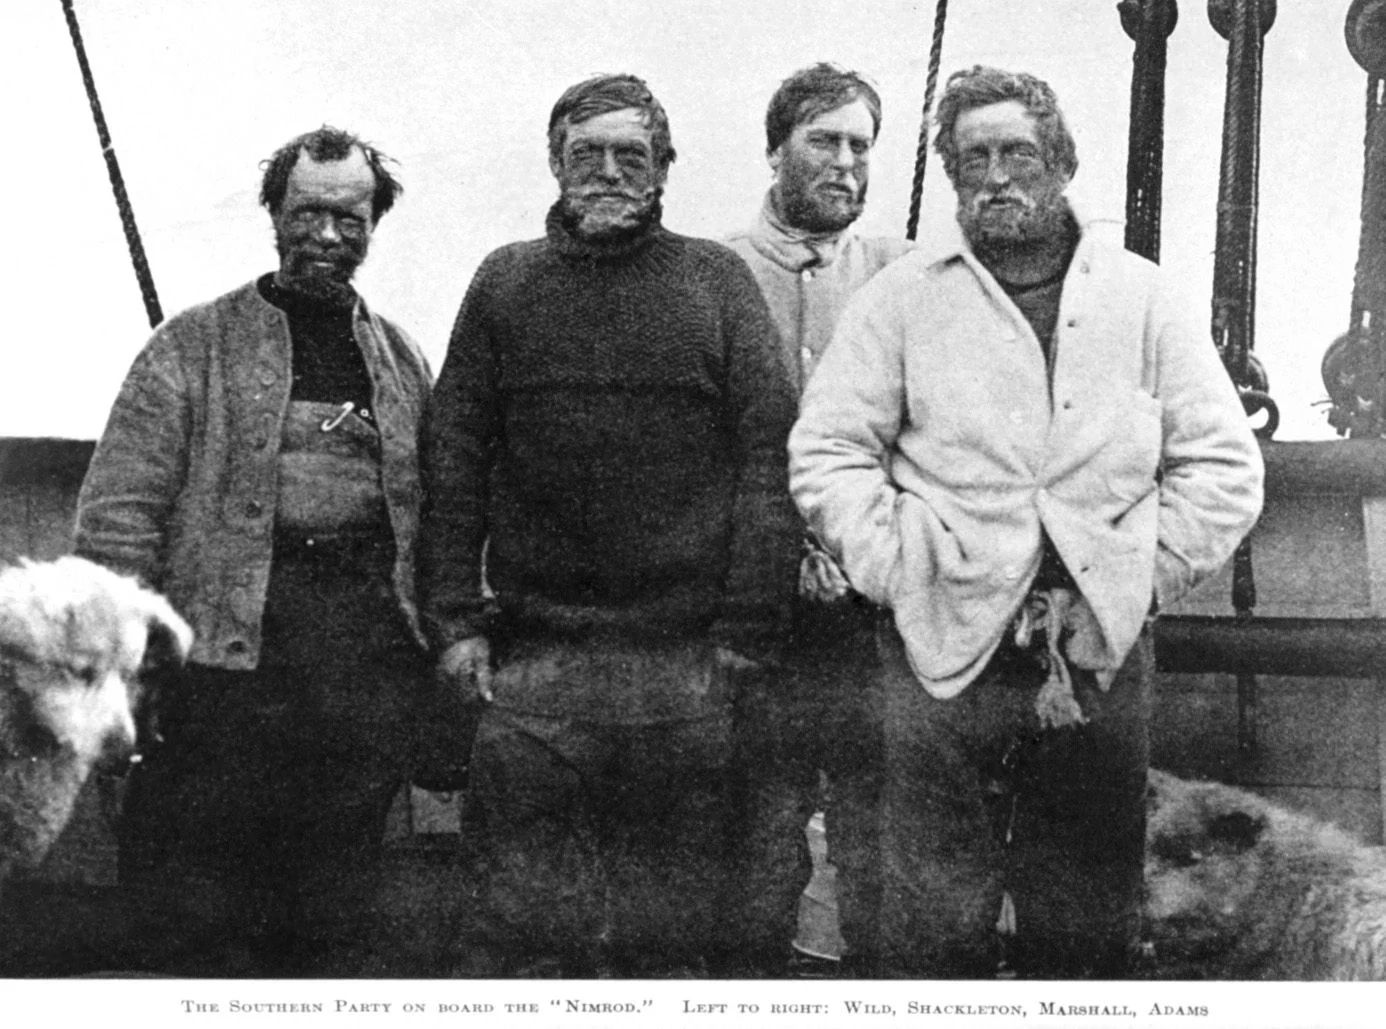 The southern party on board the Nimrod, with Wild, Ernest Shackleton, Marshall and Adams.